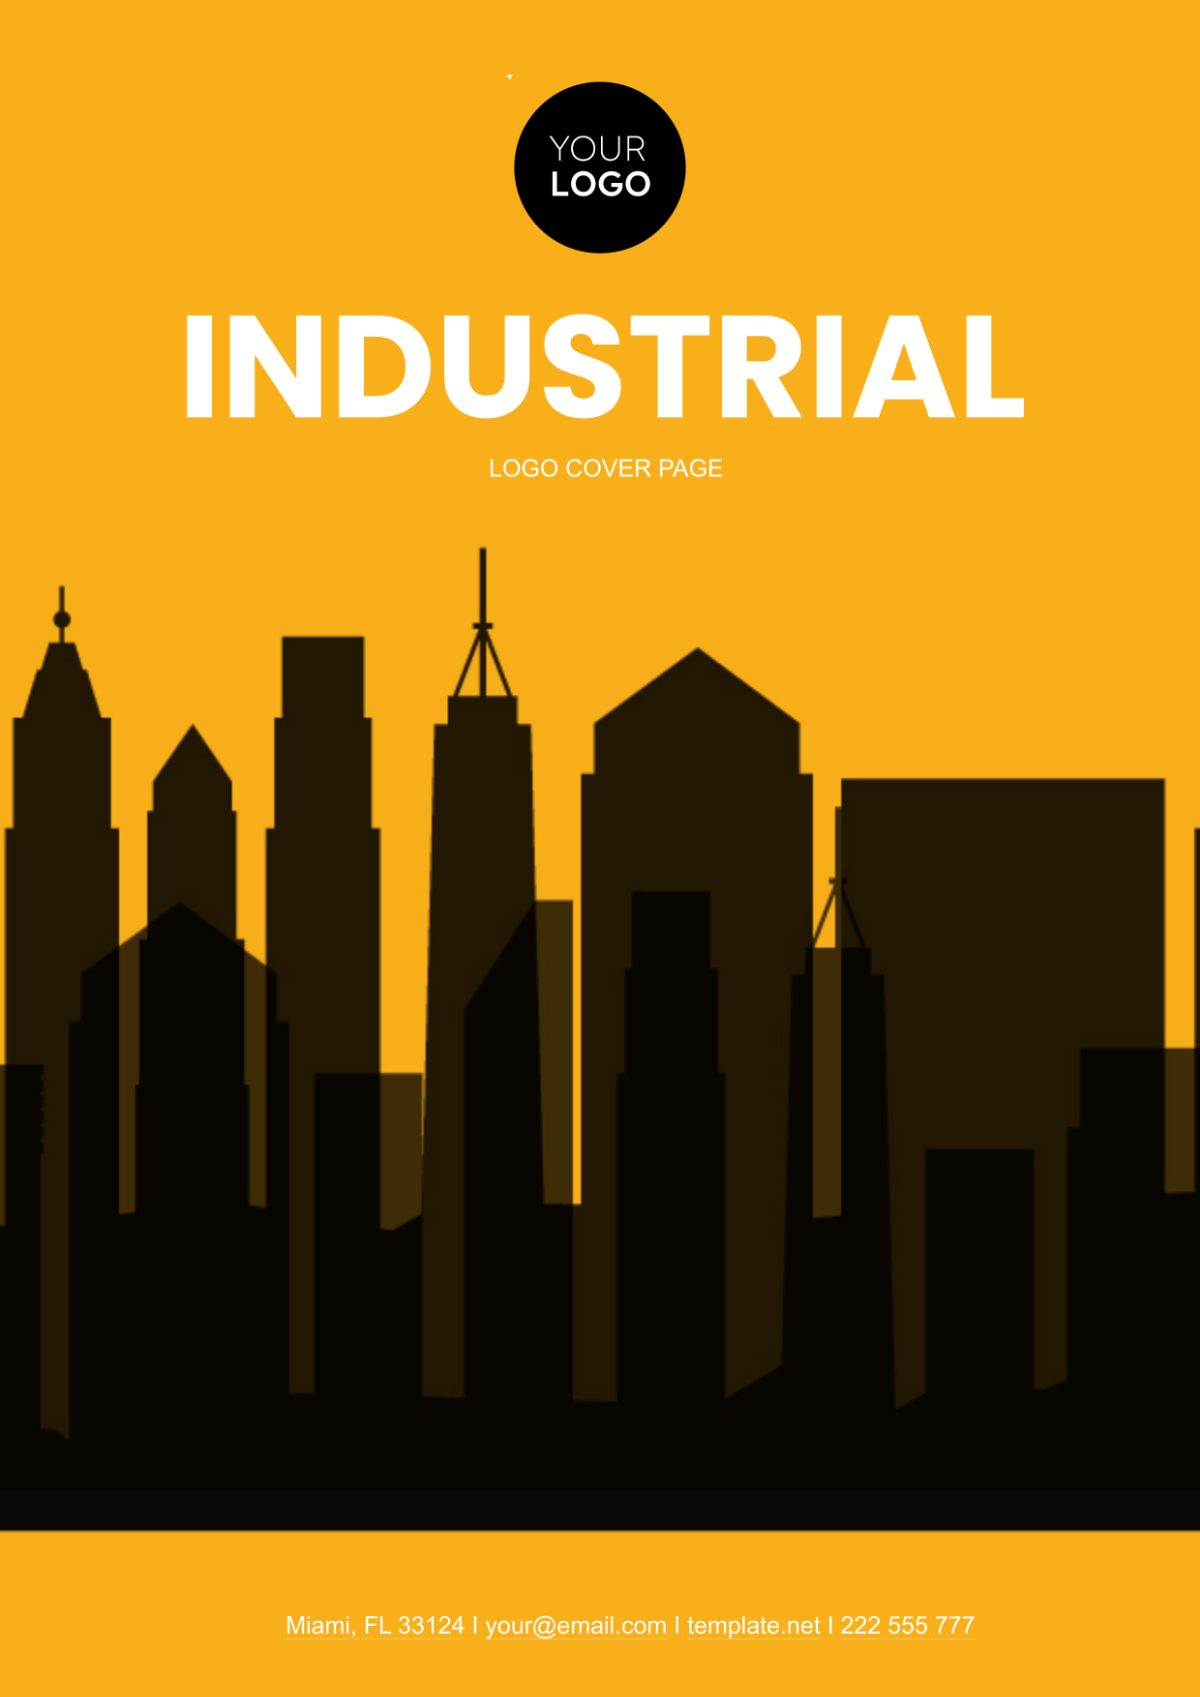 Industrial Logo Cover Page Template